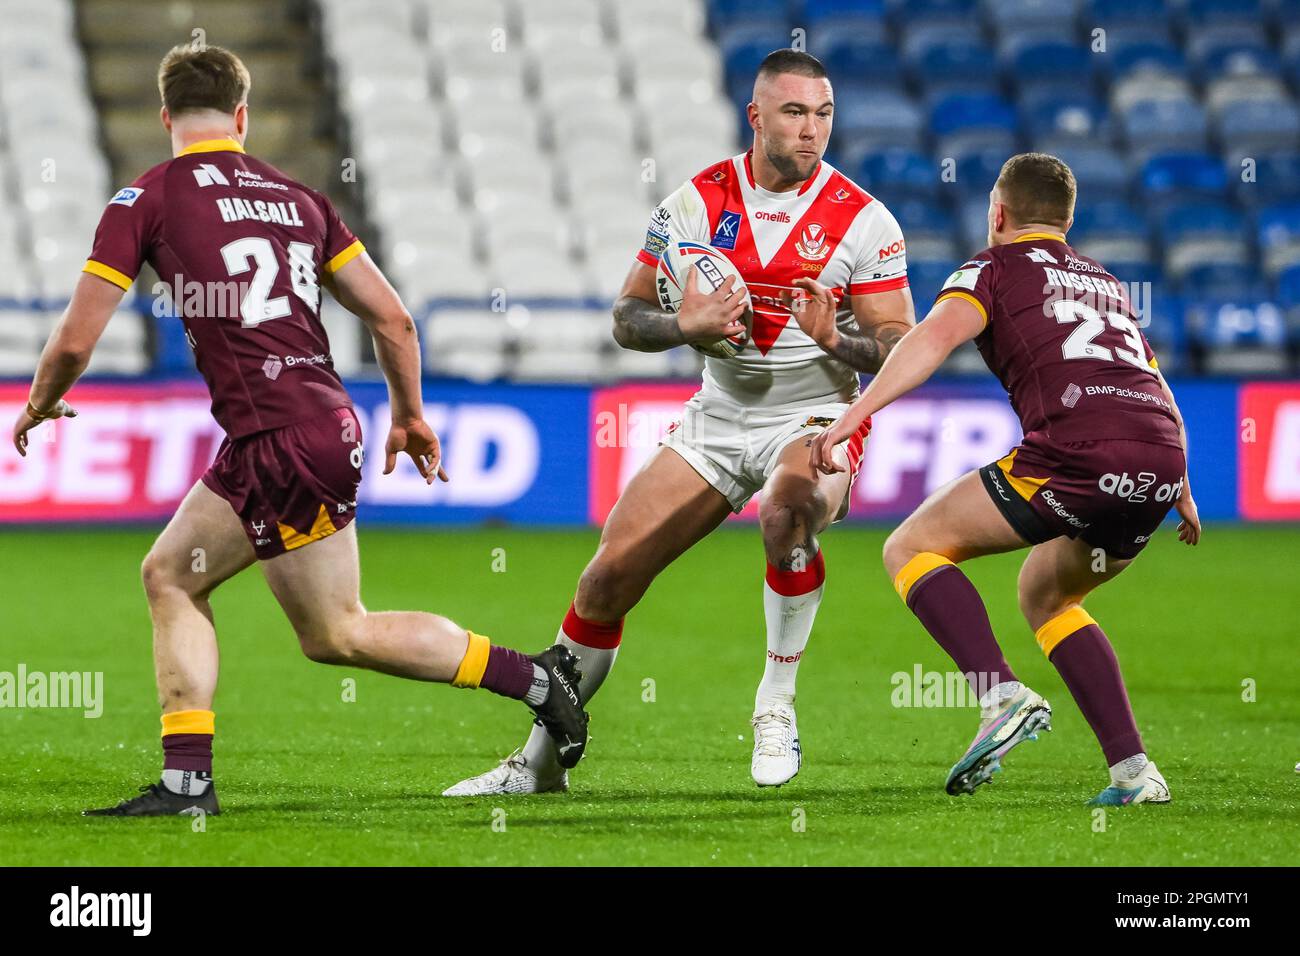 Curtis Sironen #16 of St Helens in actionduring the Betfred Super League Round 6 match Huddersfield Giants vs St Helens at John Smith's Stadium, Huddersfield, United Kingdom, 23rd March 2023  (Photo by Craig Thomas/News Images) Stock Photo